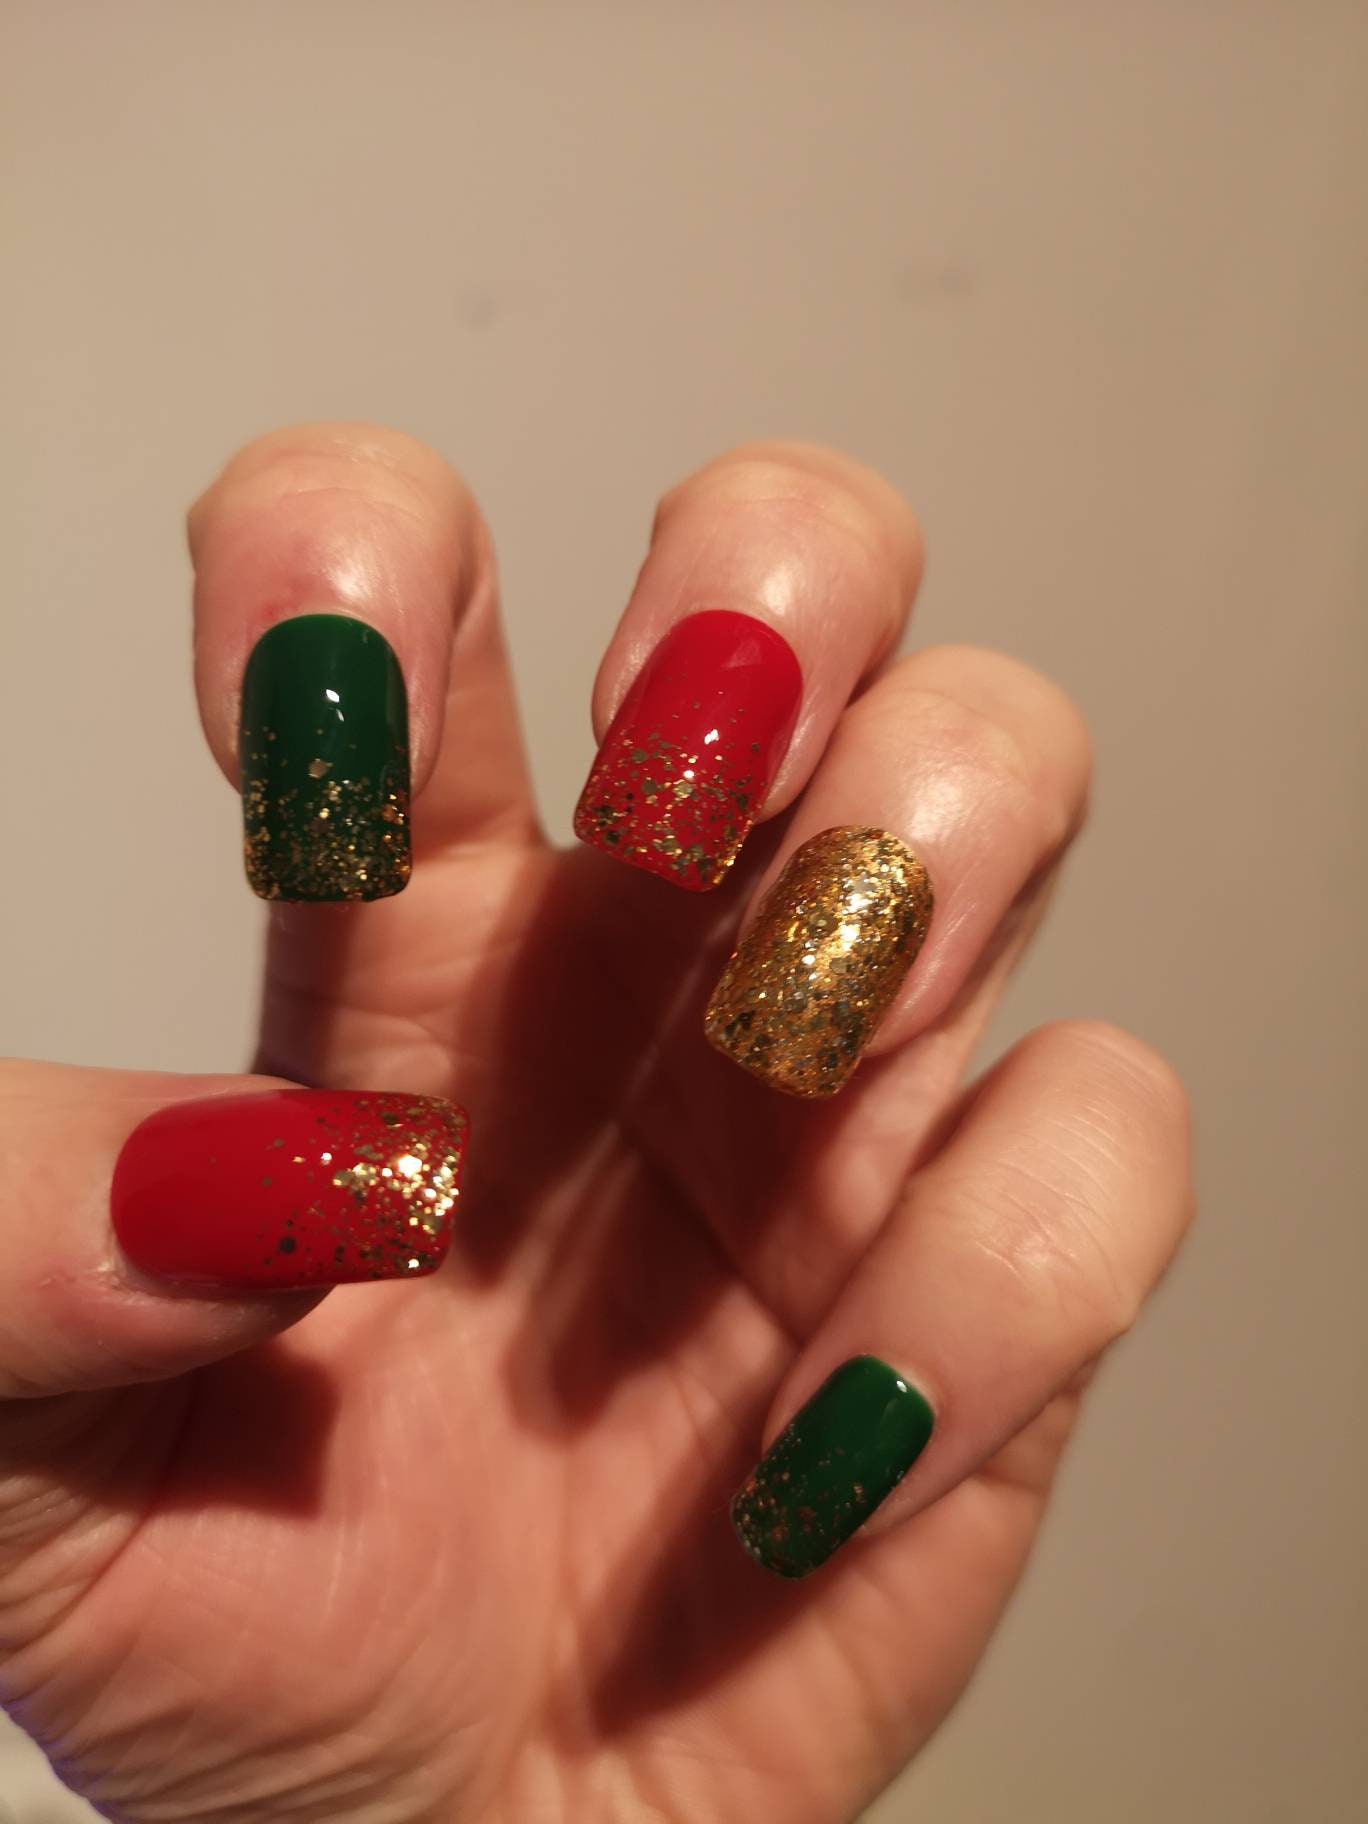 35 Christmas Nail Art Designs That Are Extra Festive